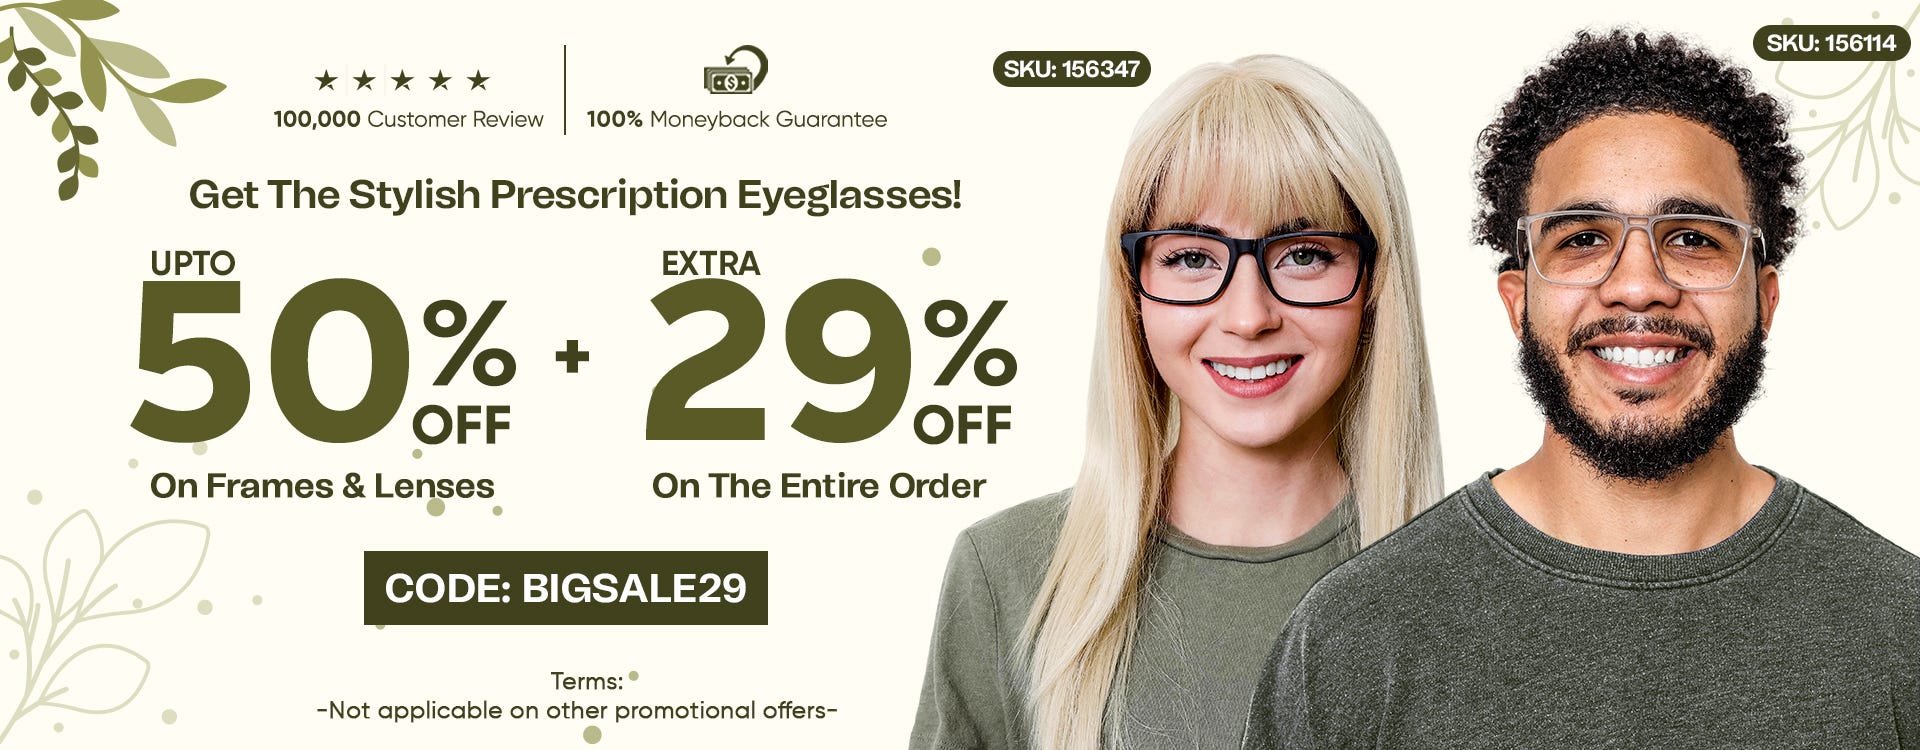 UPTO 50% Discount On All Frames & Lenses + 29% OFF On The Entire Order CODE: NEWYEAR23